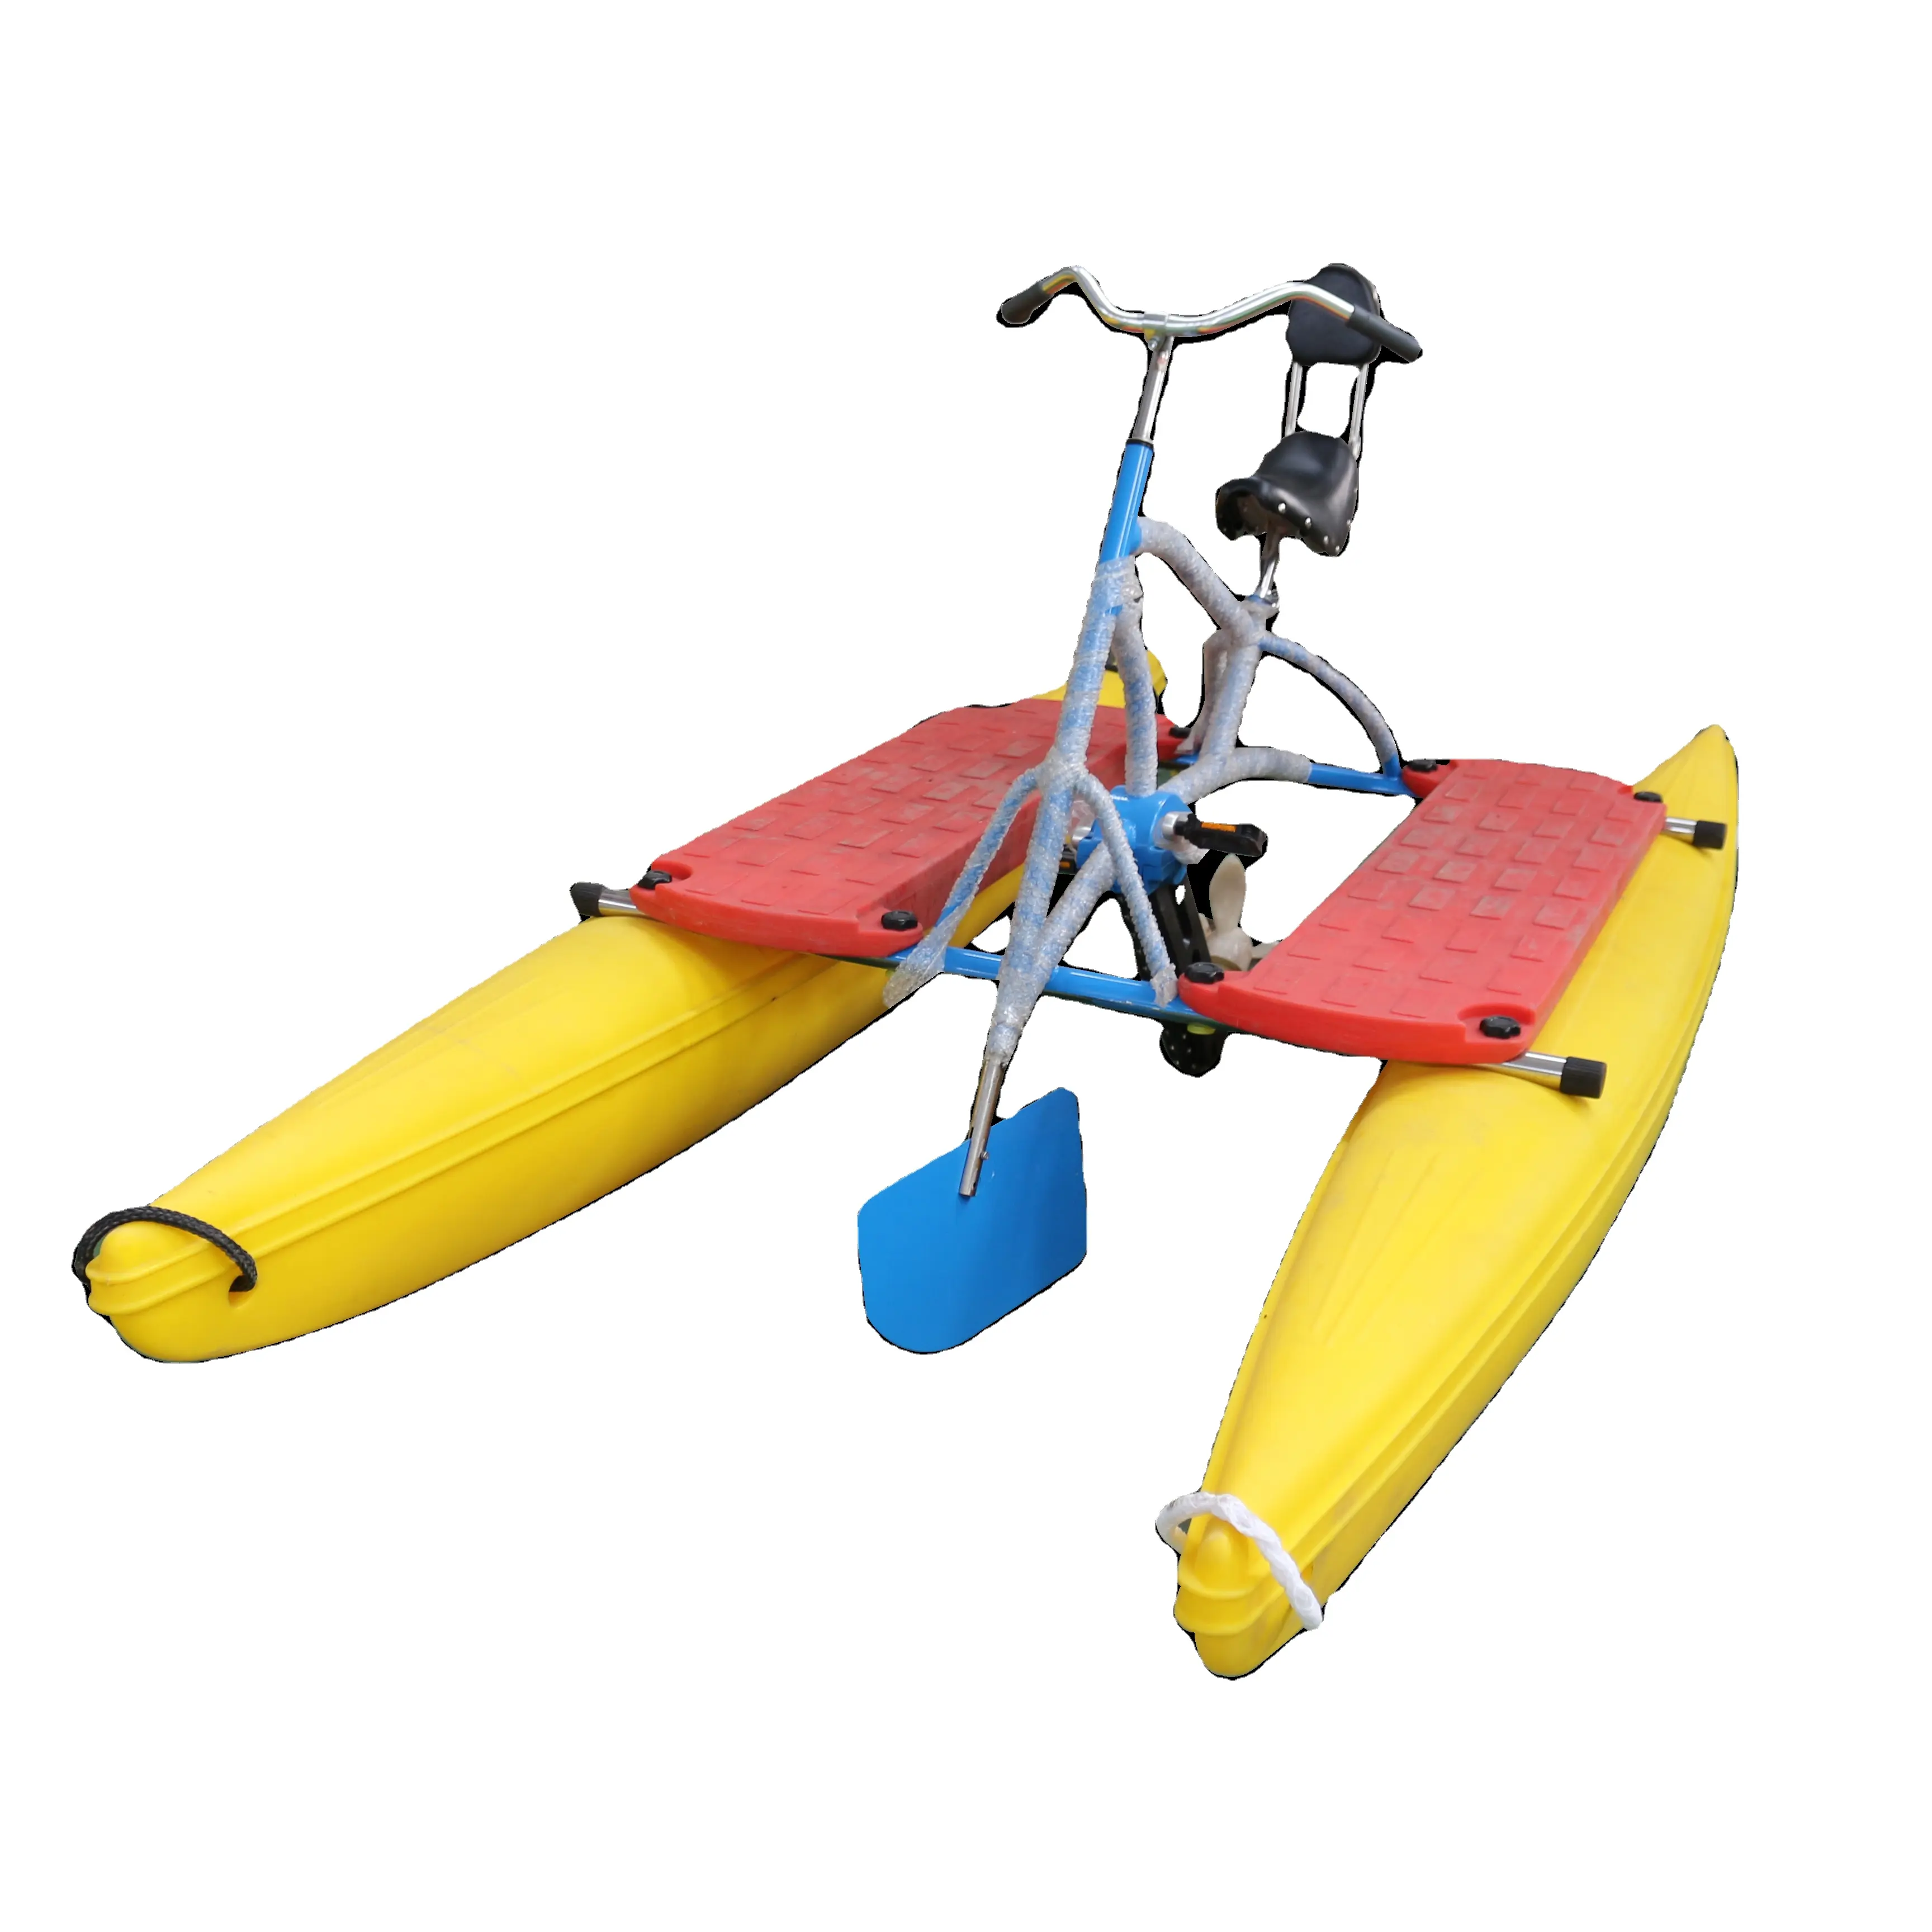 HaoTong New Yellow Banana Shape water Bicycle Water Auqa Bike Water Pedal Bikes For Sale